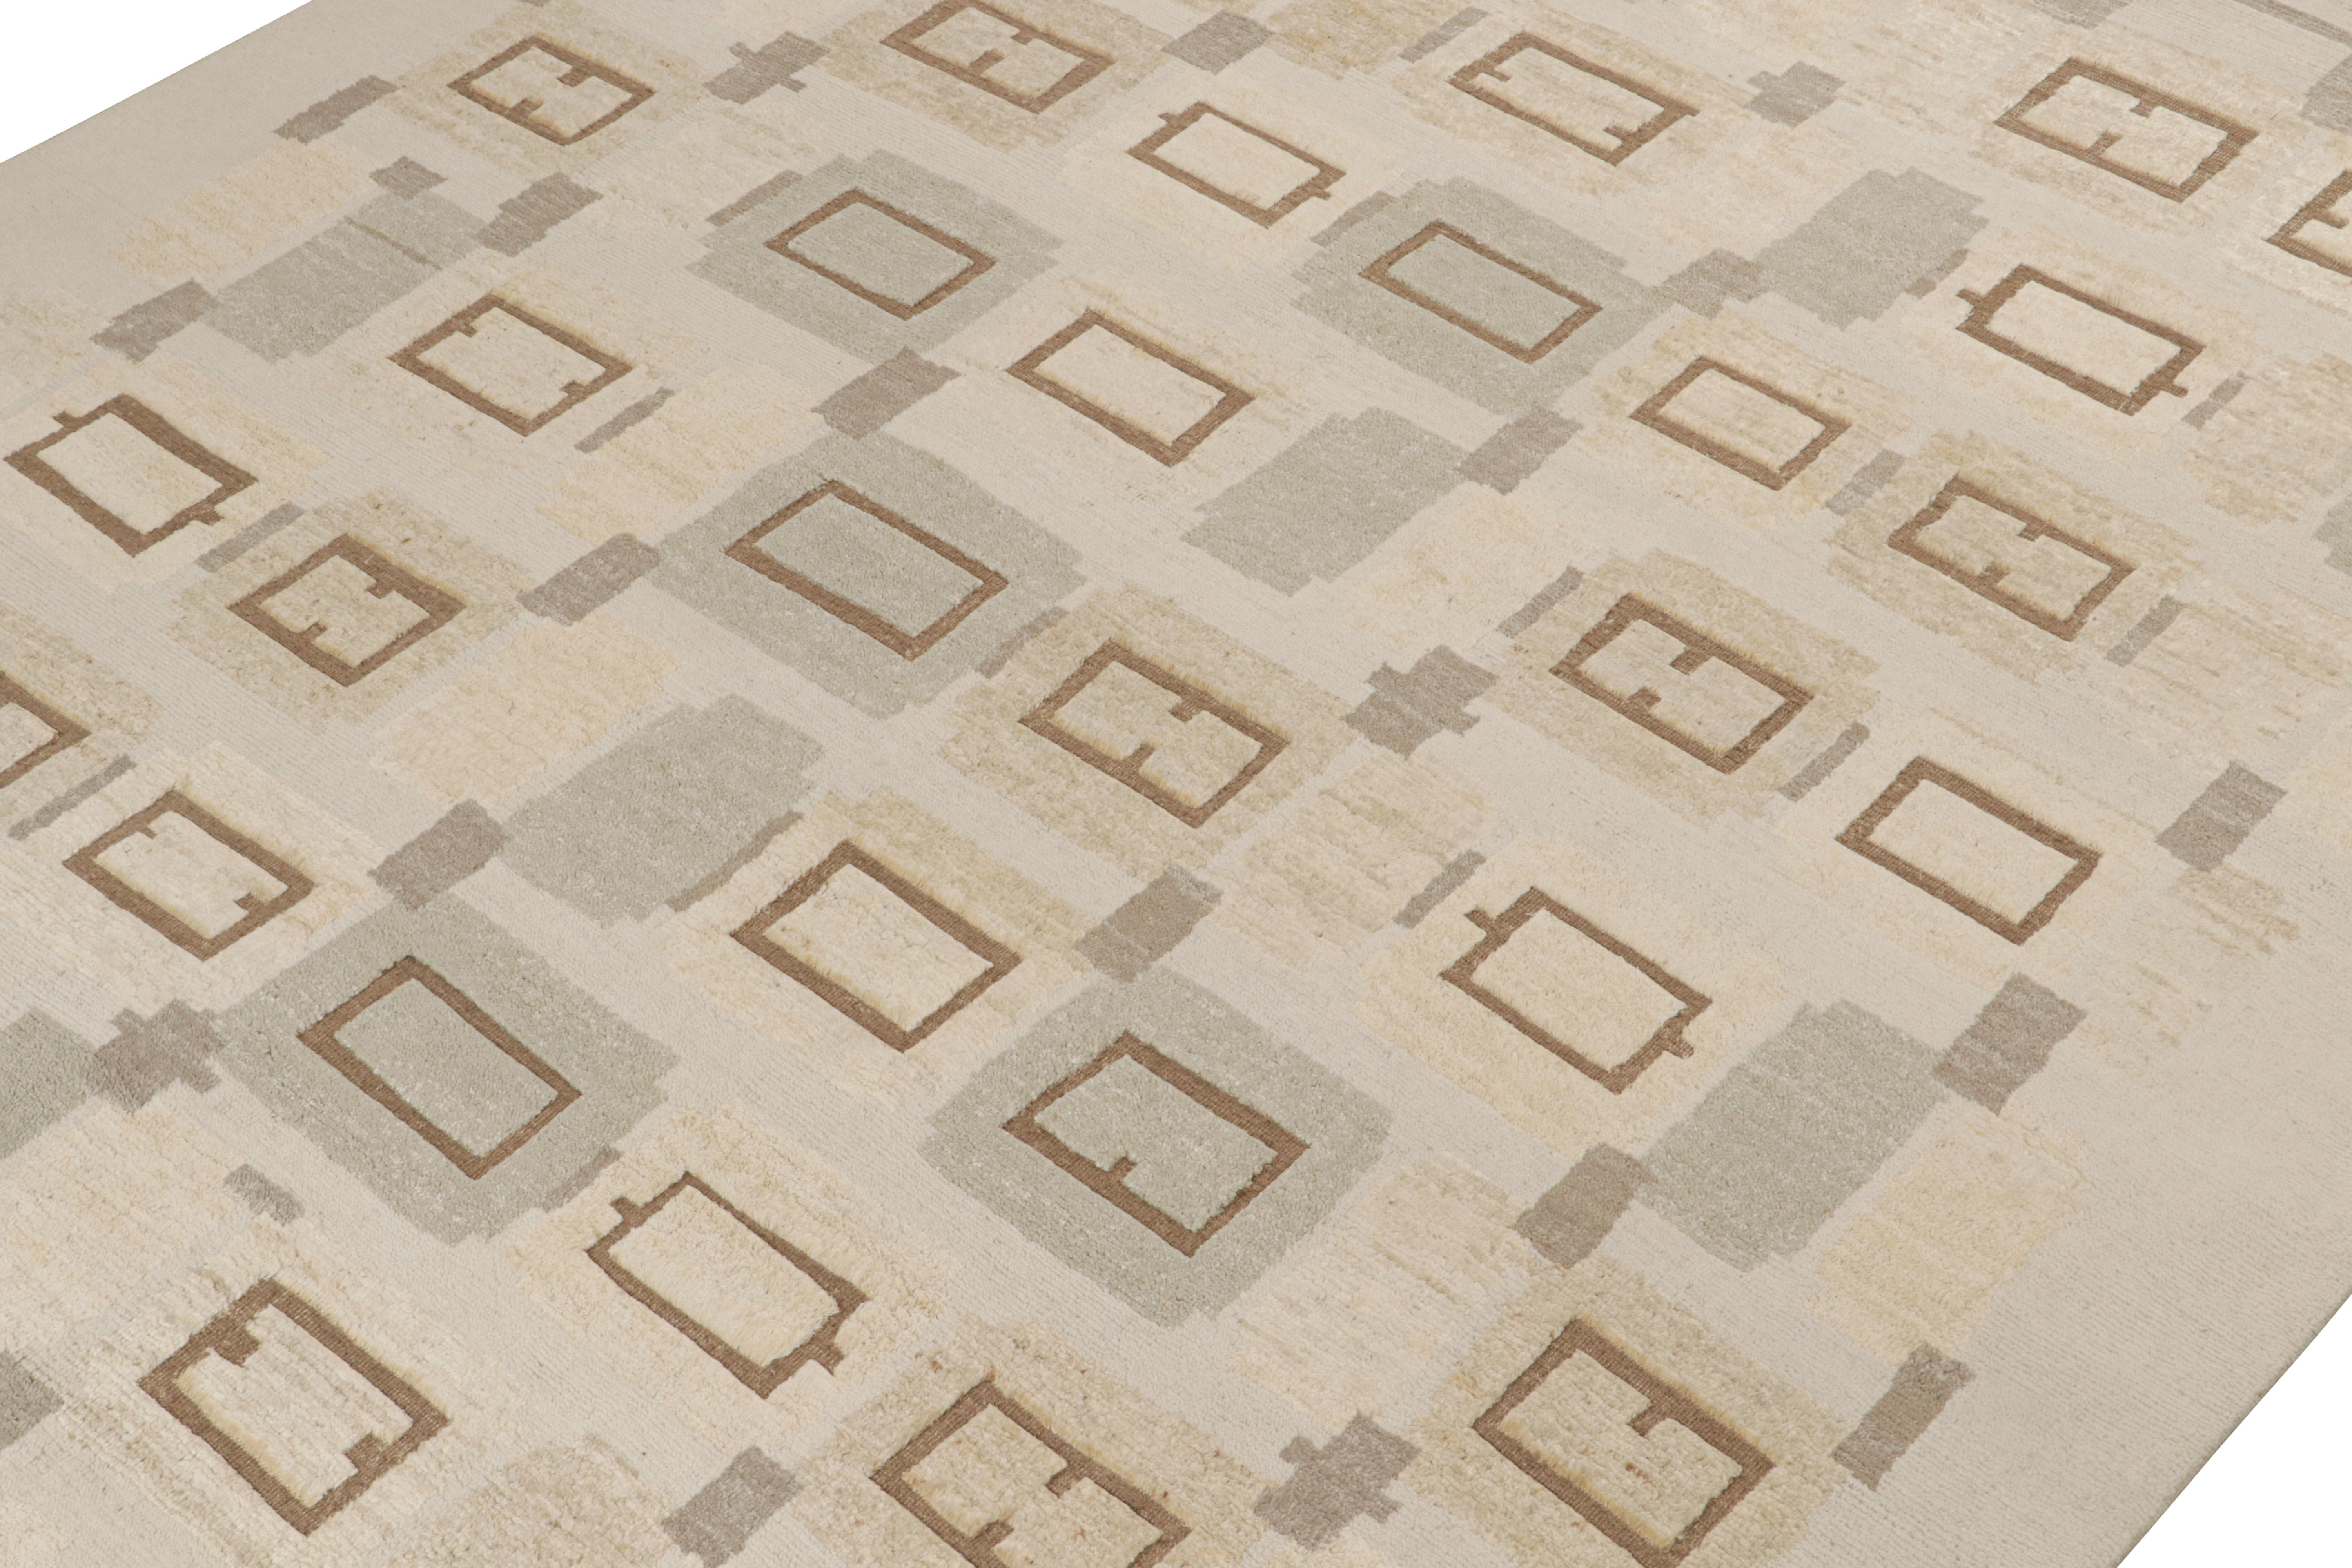 A smart 9x12 Swedish style rug from our award-winning Scandinavian collection. Hand-knotted in wool. 

On the Design: 

This rug enjoys a subtle high-low texture married to geometric patterns in brown, cream and greige. This proprietary